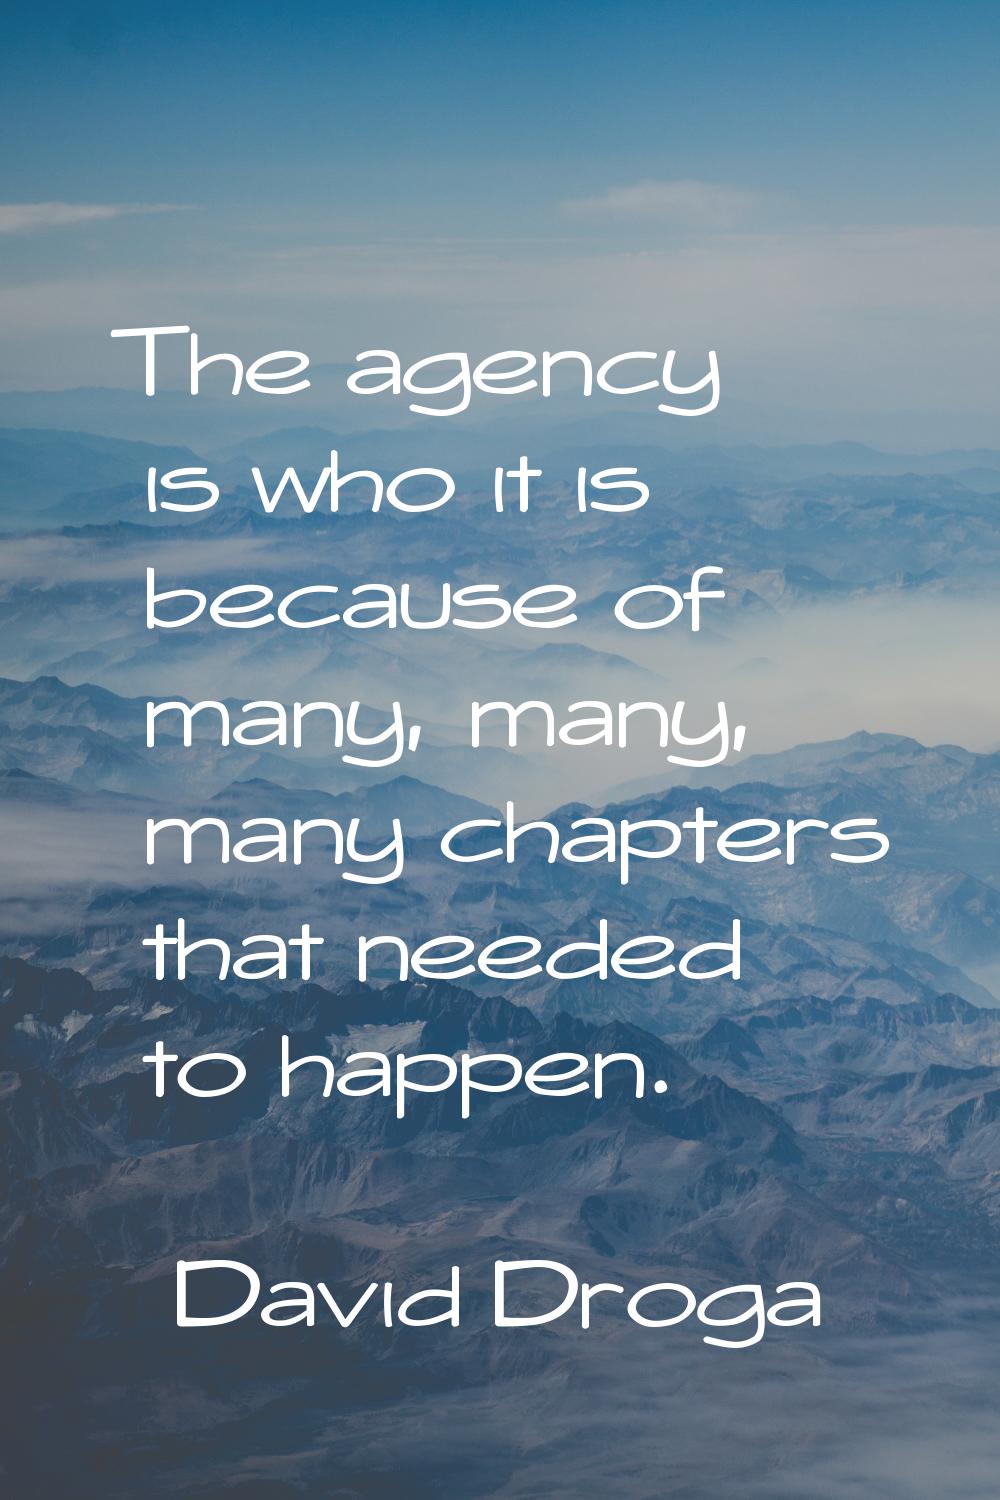 The agency is who it is because of many, many, many chapters that needed to happen.